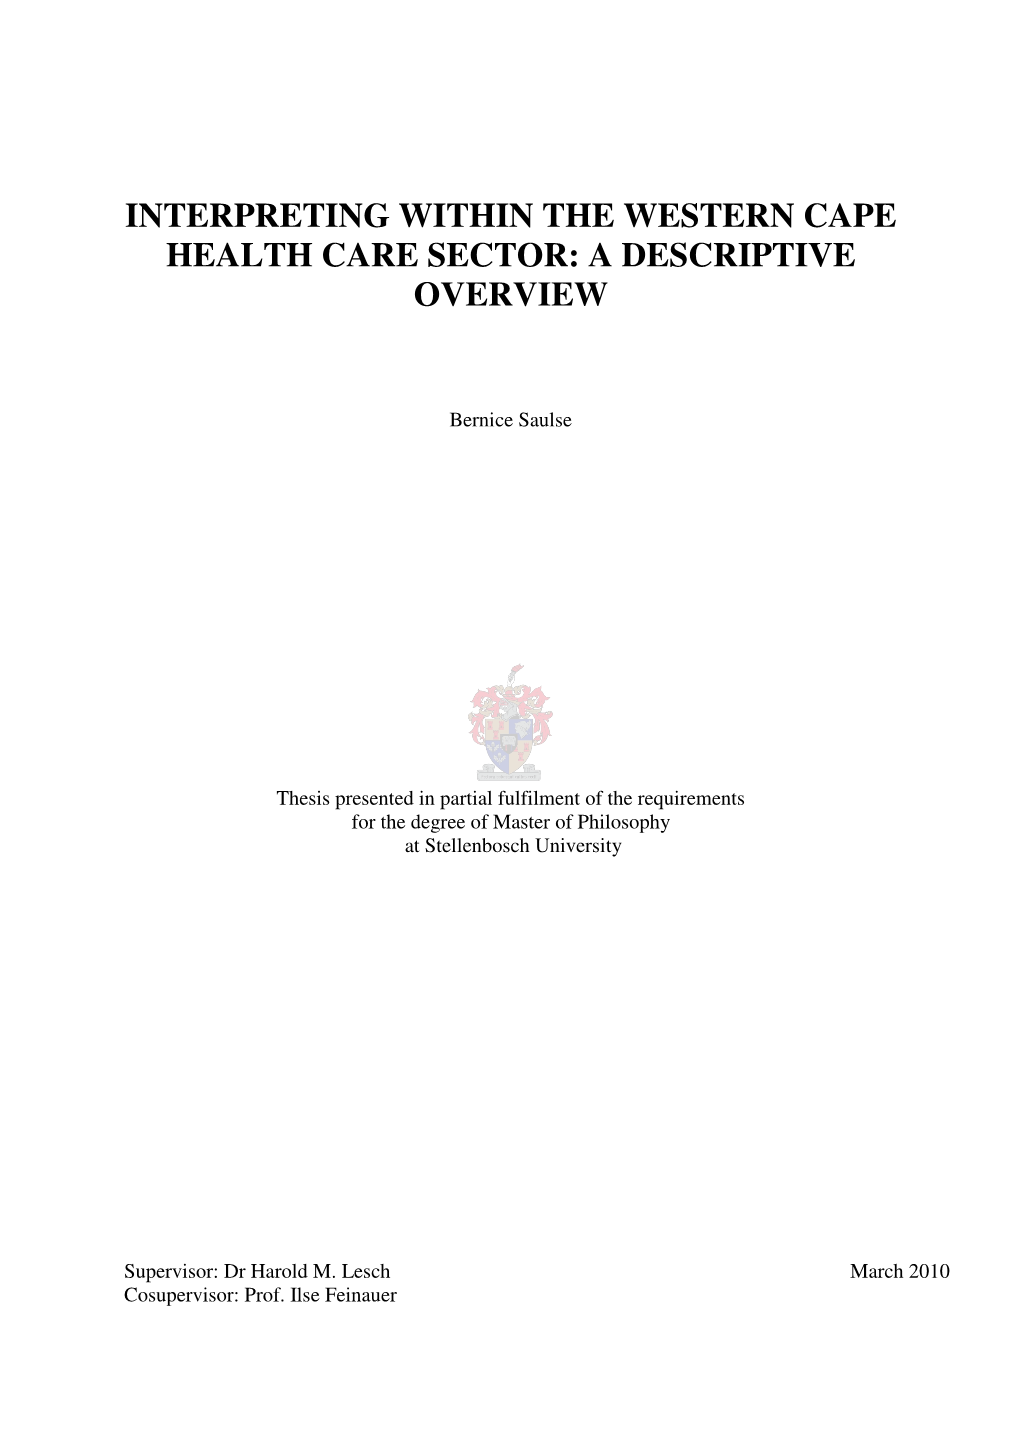 Interpreting Within the Western Cape Health Care Sector: a Descriptive Overview